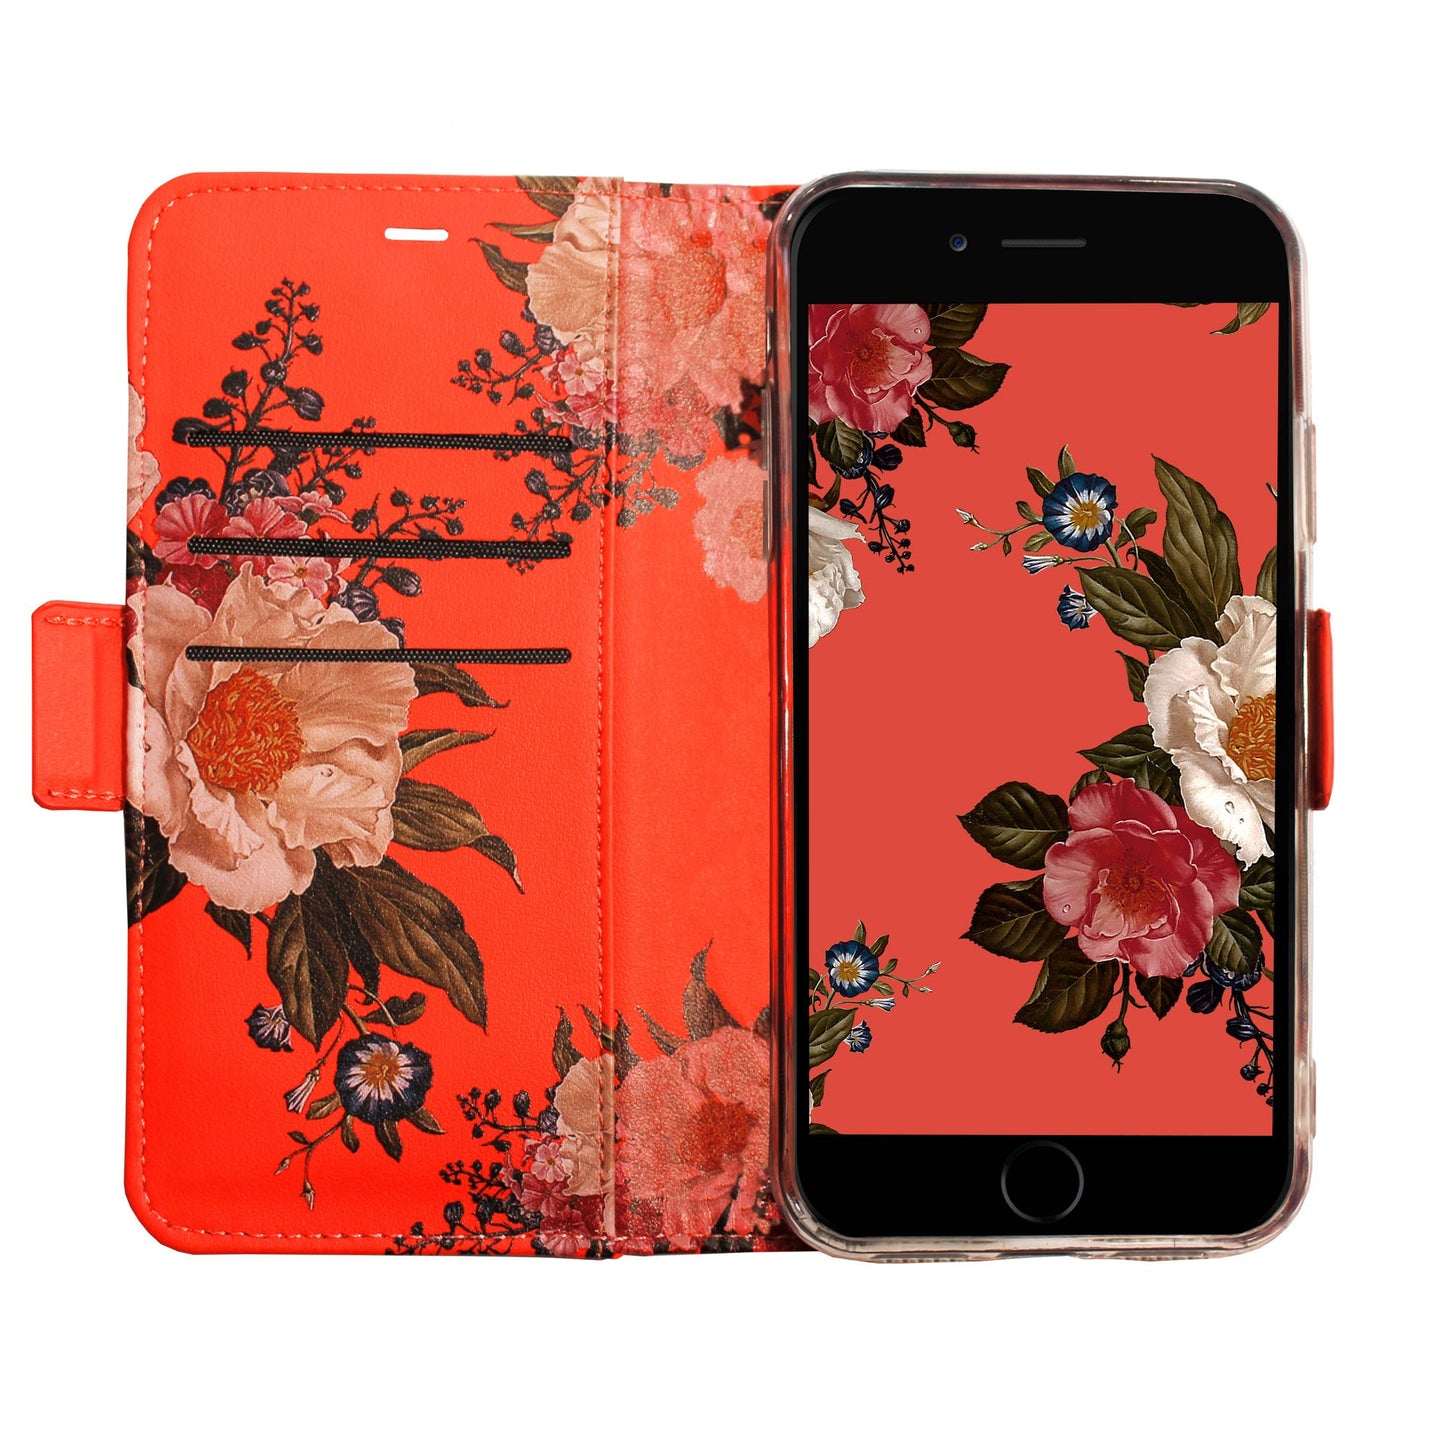 Flowers on Red Victor Case for iPhone 6/6S/7/8 Plus